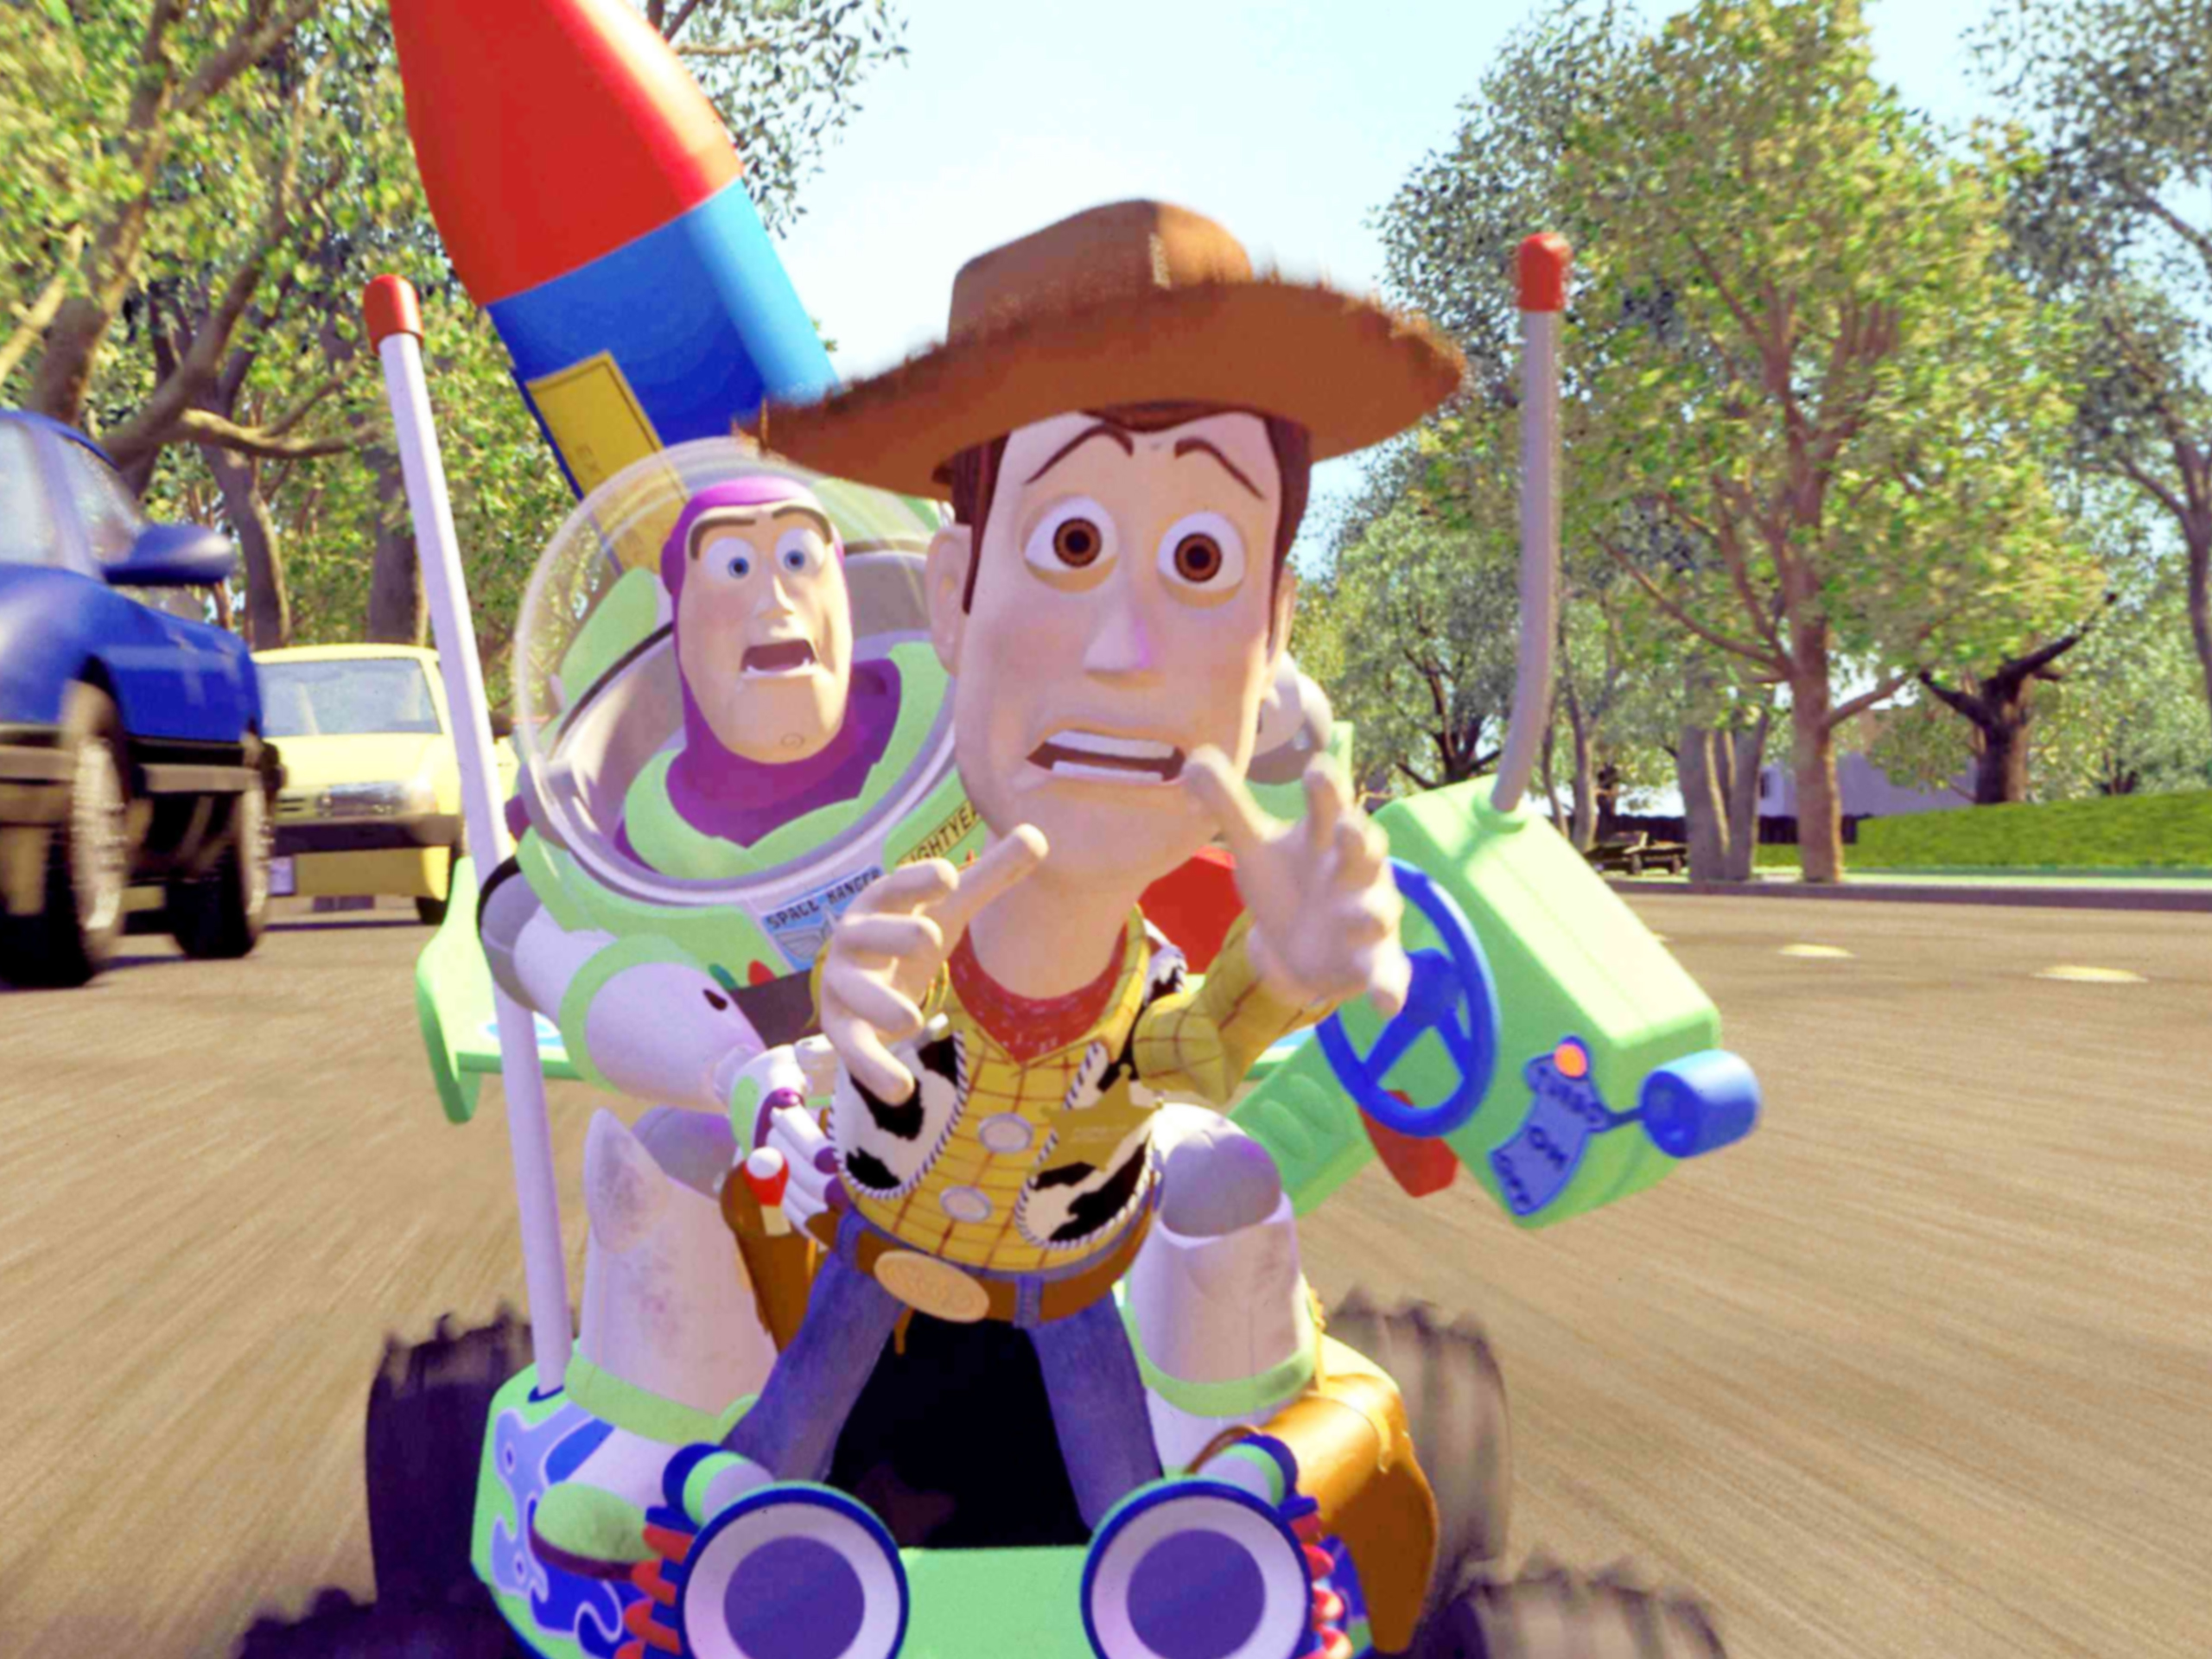 Toy Story 3 TheWallpapers Free Desktop Wallpapers for HD Widescreen